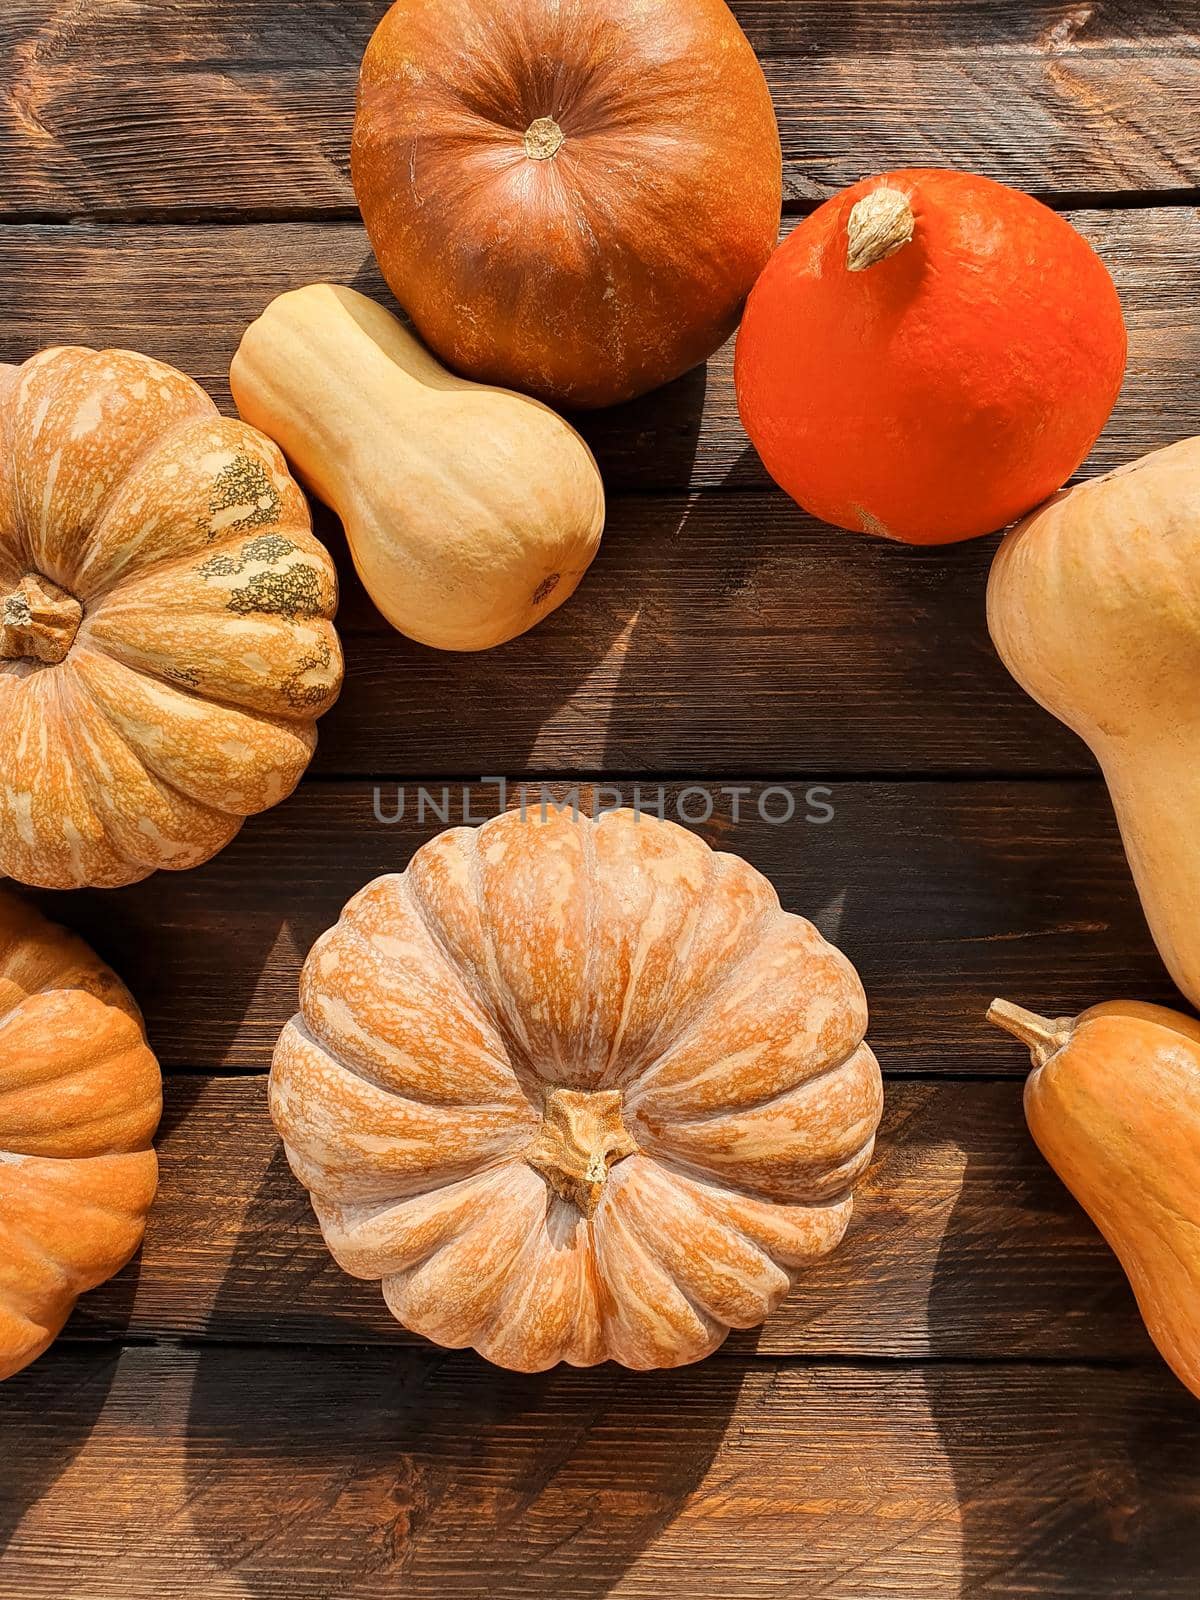 There are various pumpkins on the wooden table by Spirina